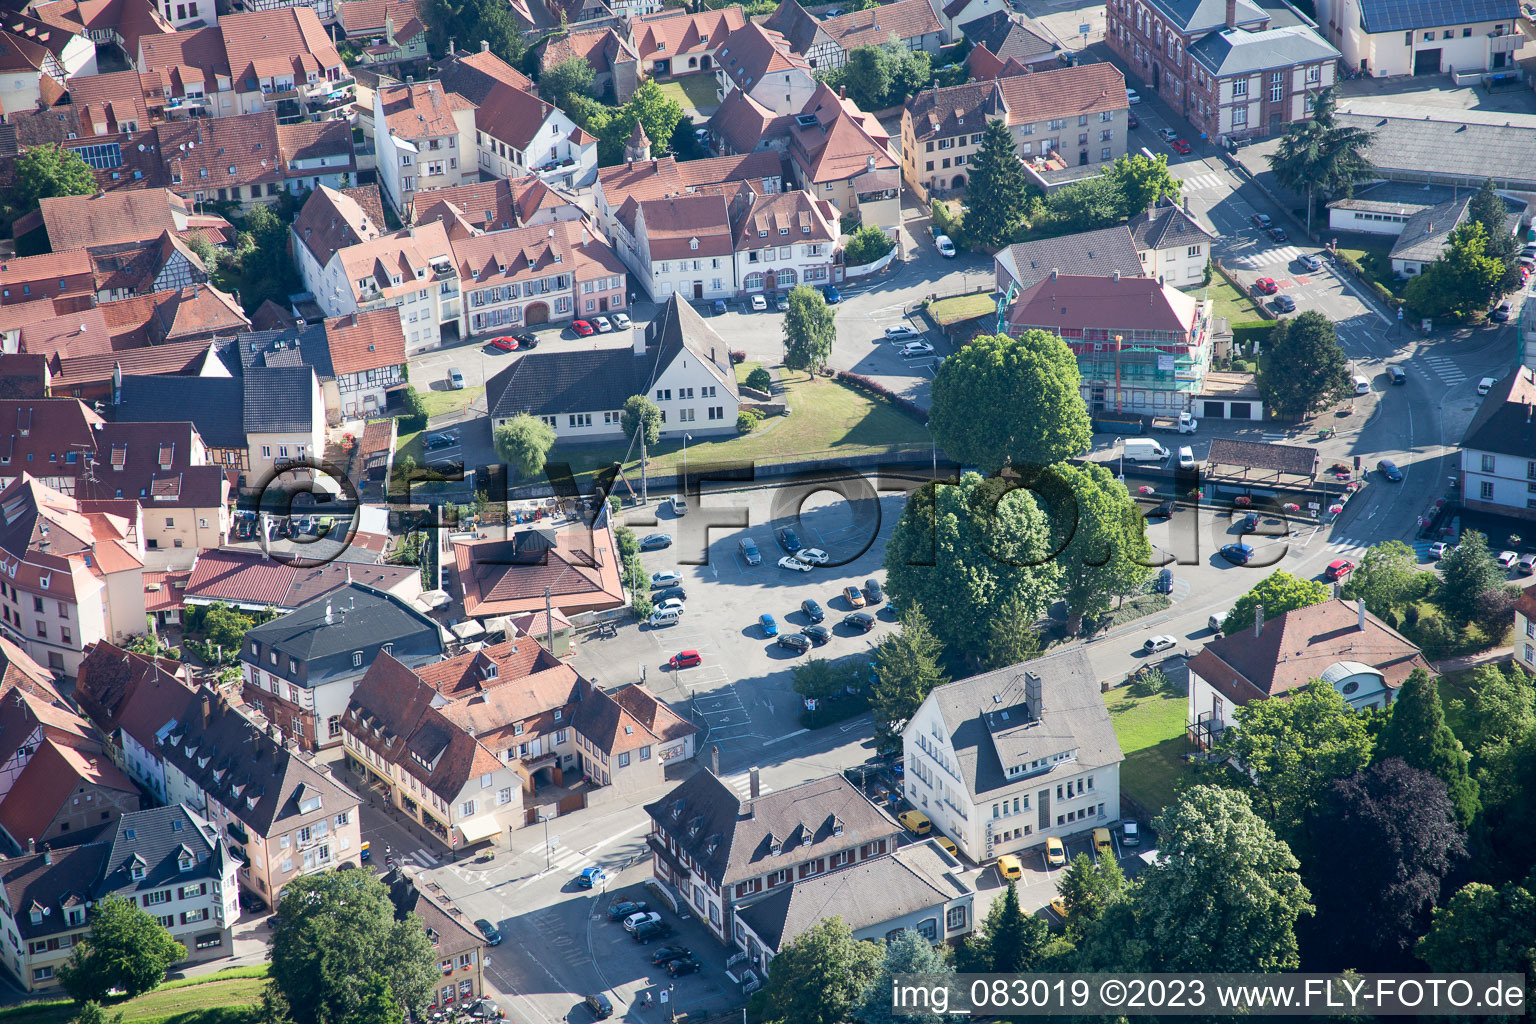 Drone recording of Wissembourg in the state Bas-Rhin, France